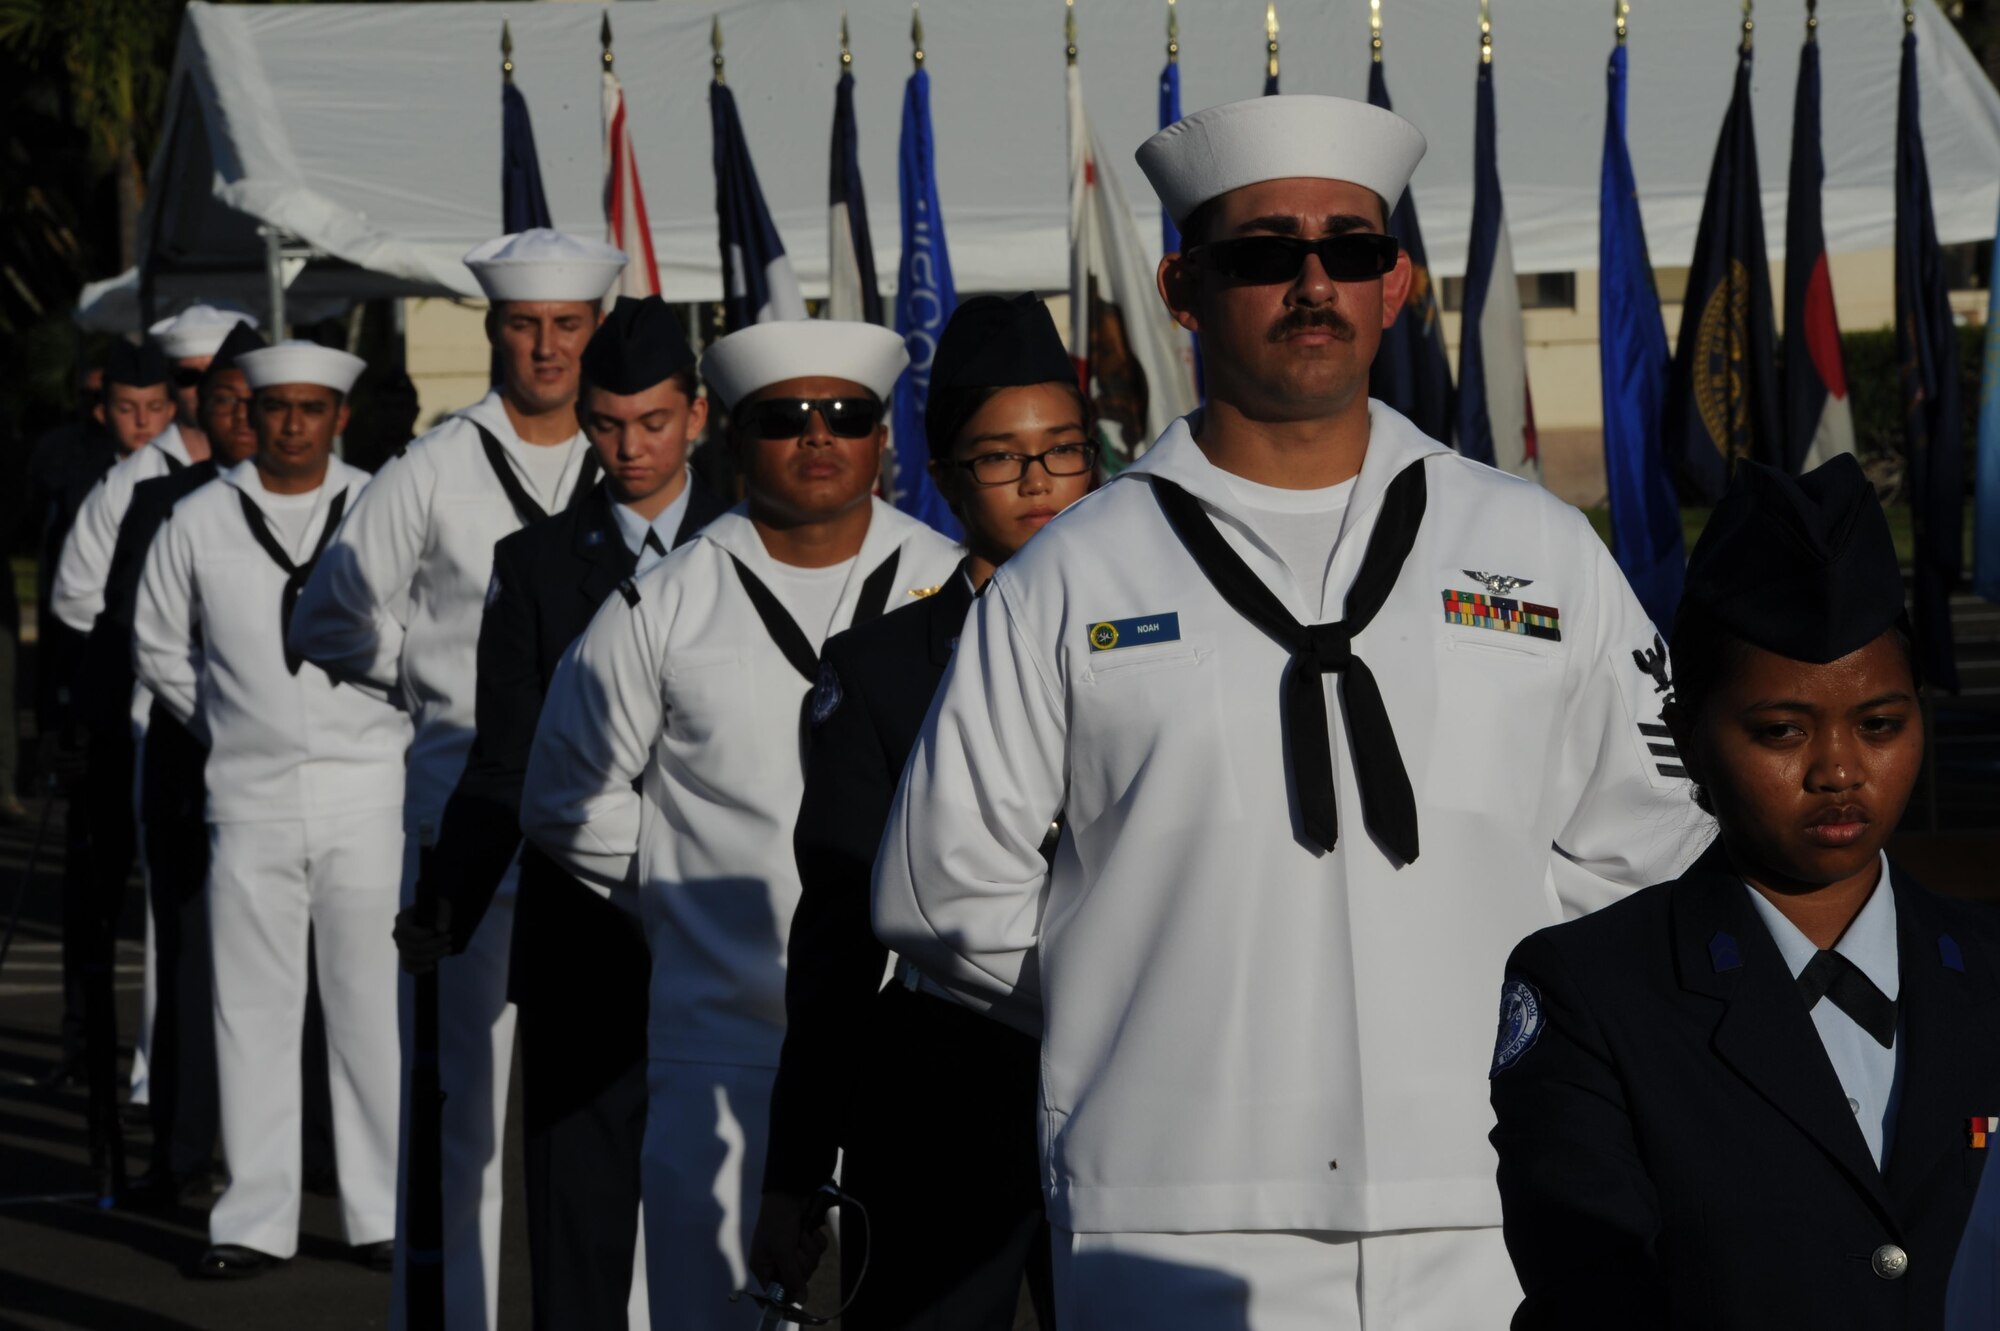 U.S. Air Force and U.S. Navy cadets stand in formation during the 75th Commemoration of the December 7, 1941 attack on Hickam Field ceremony  Dec. 7, 2016, at Joint Base Pearl Harbor-Hickam, Hawaii. The attacks on seven bases throughout Oahu precipitated America's entry into World War II, and the annual commemoration ceremony is designed to foster reflection, remembrance, and understanding for those affected by the events that took place 75 years ago. (U.S. Air Force photo by Tech. Sgt. Nathan Allen)